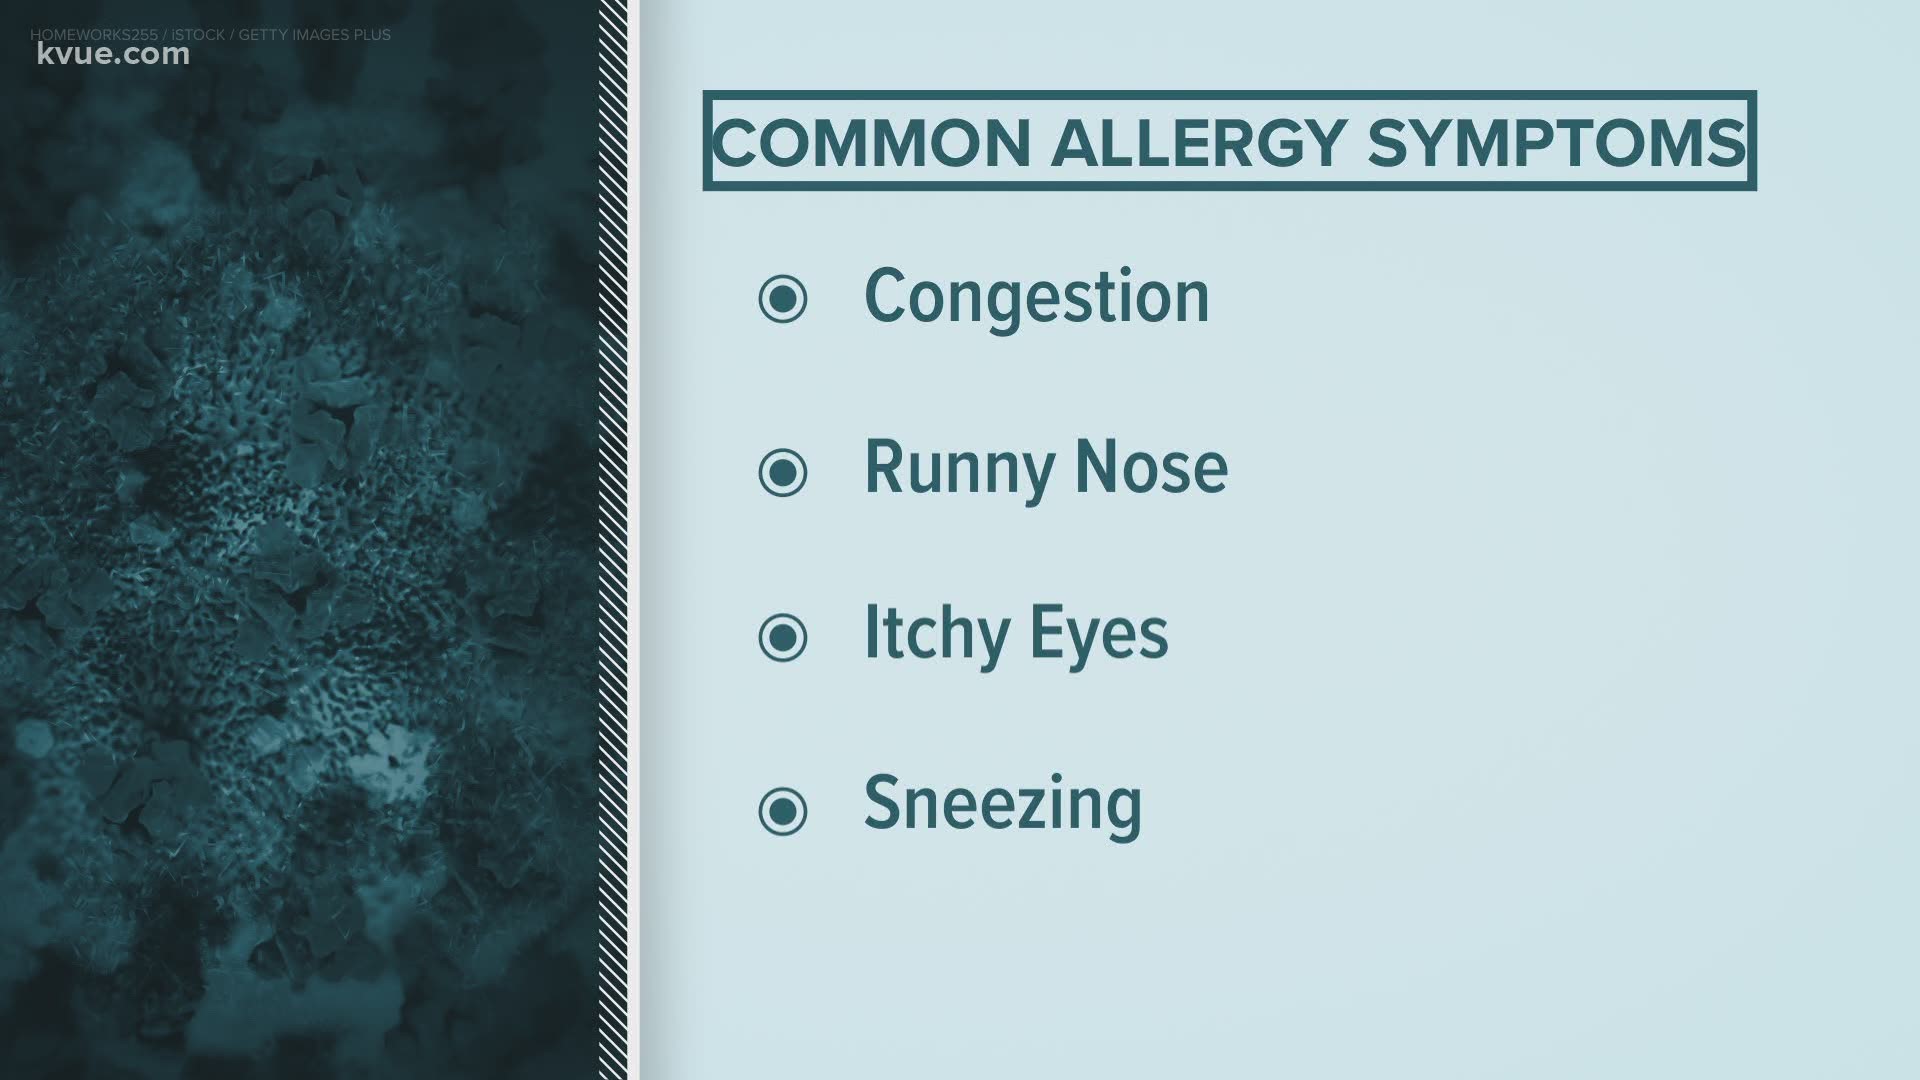 In Central Texas, allergies are year-round, so how can you tell if your symptoms could be something more serious?